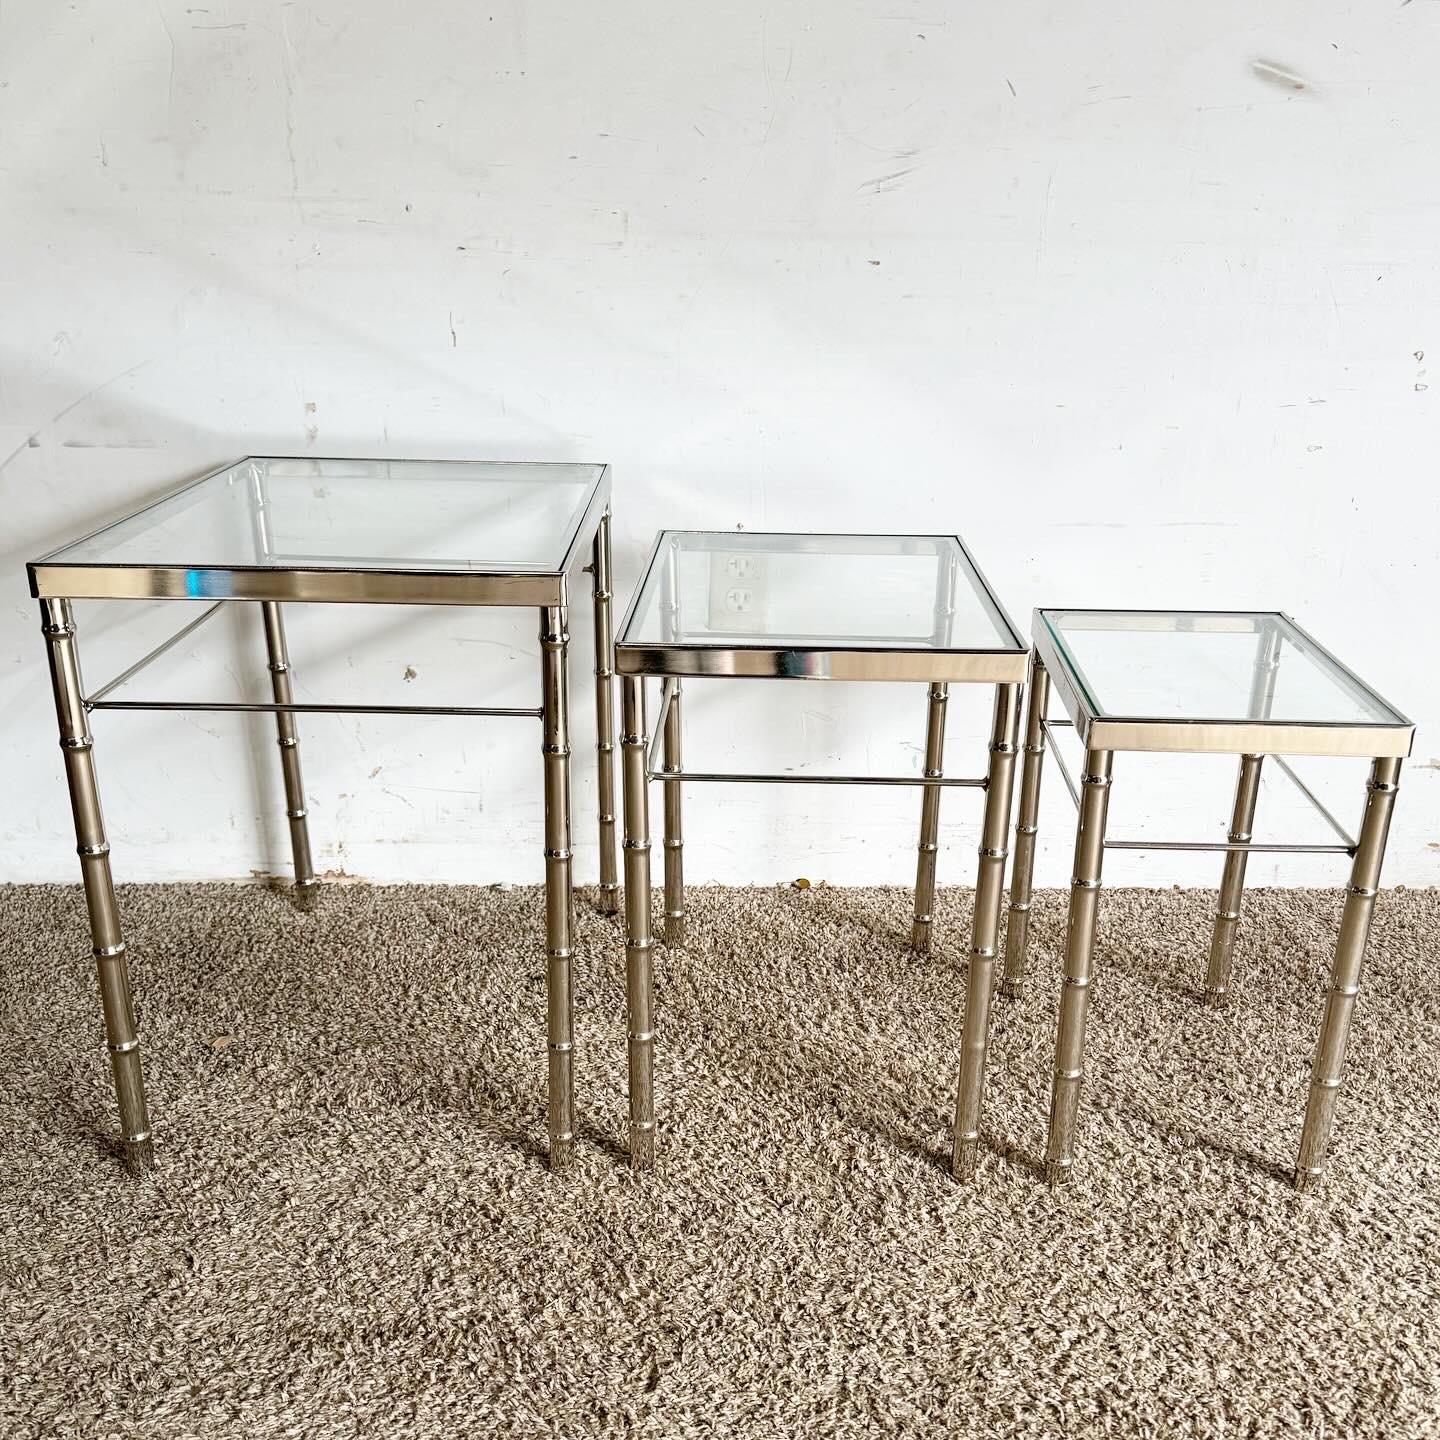 20th Century Mid Century Modern Chrome Faux Bamboo Glass Top Nesting Tables - Set of 3 For Sale